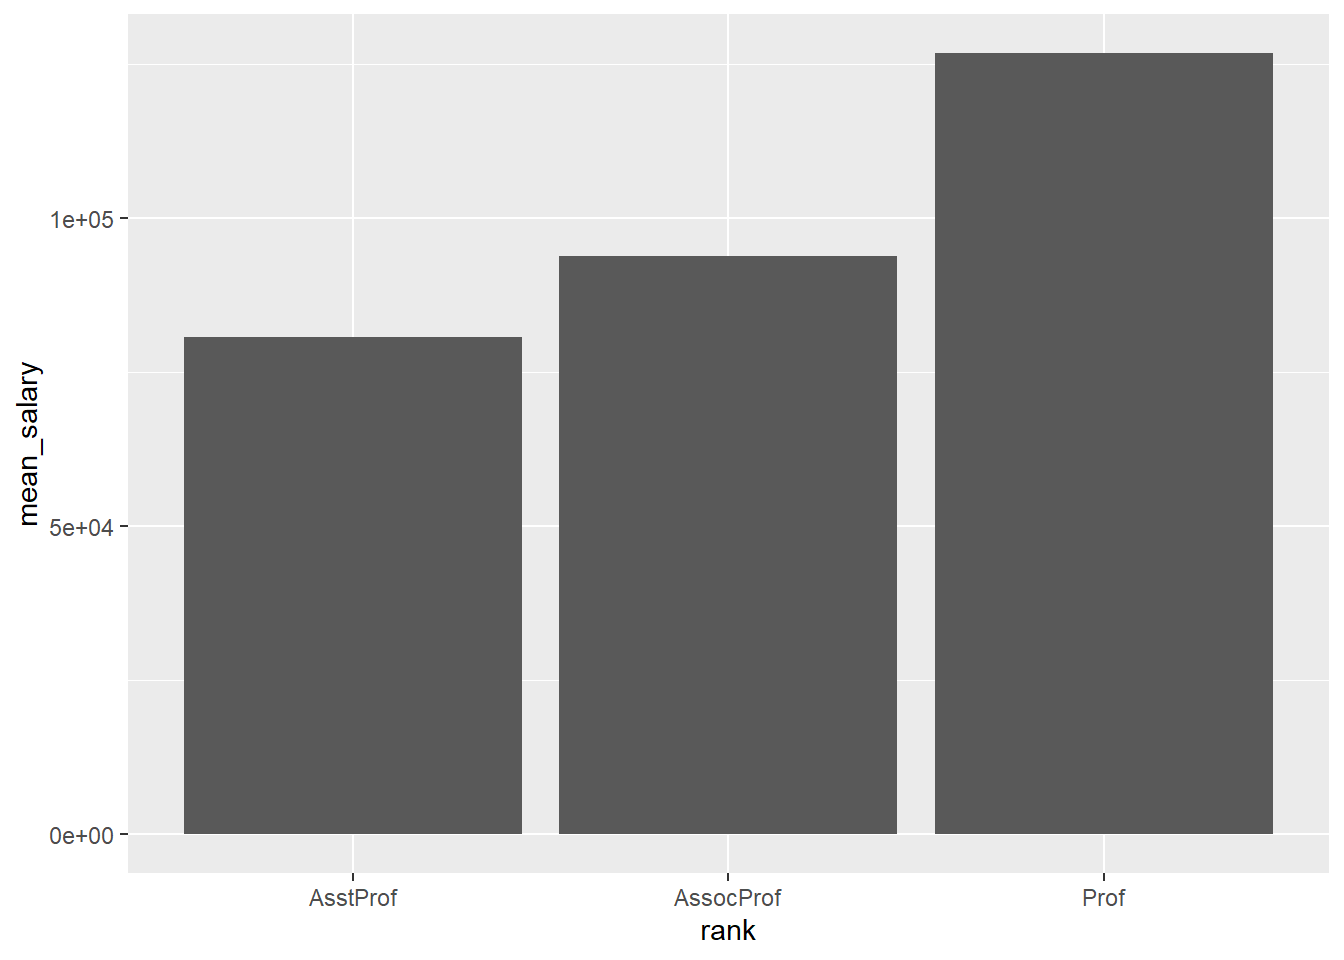 Bar chart displaying means